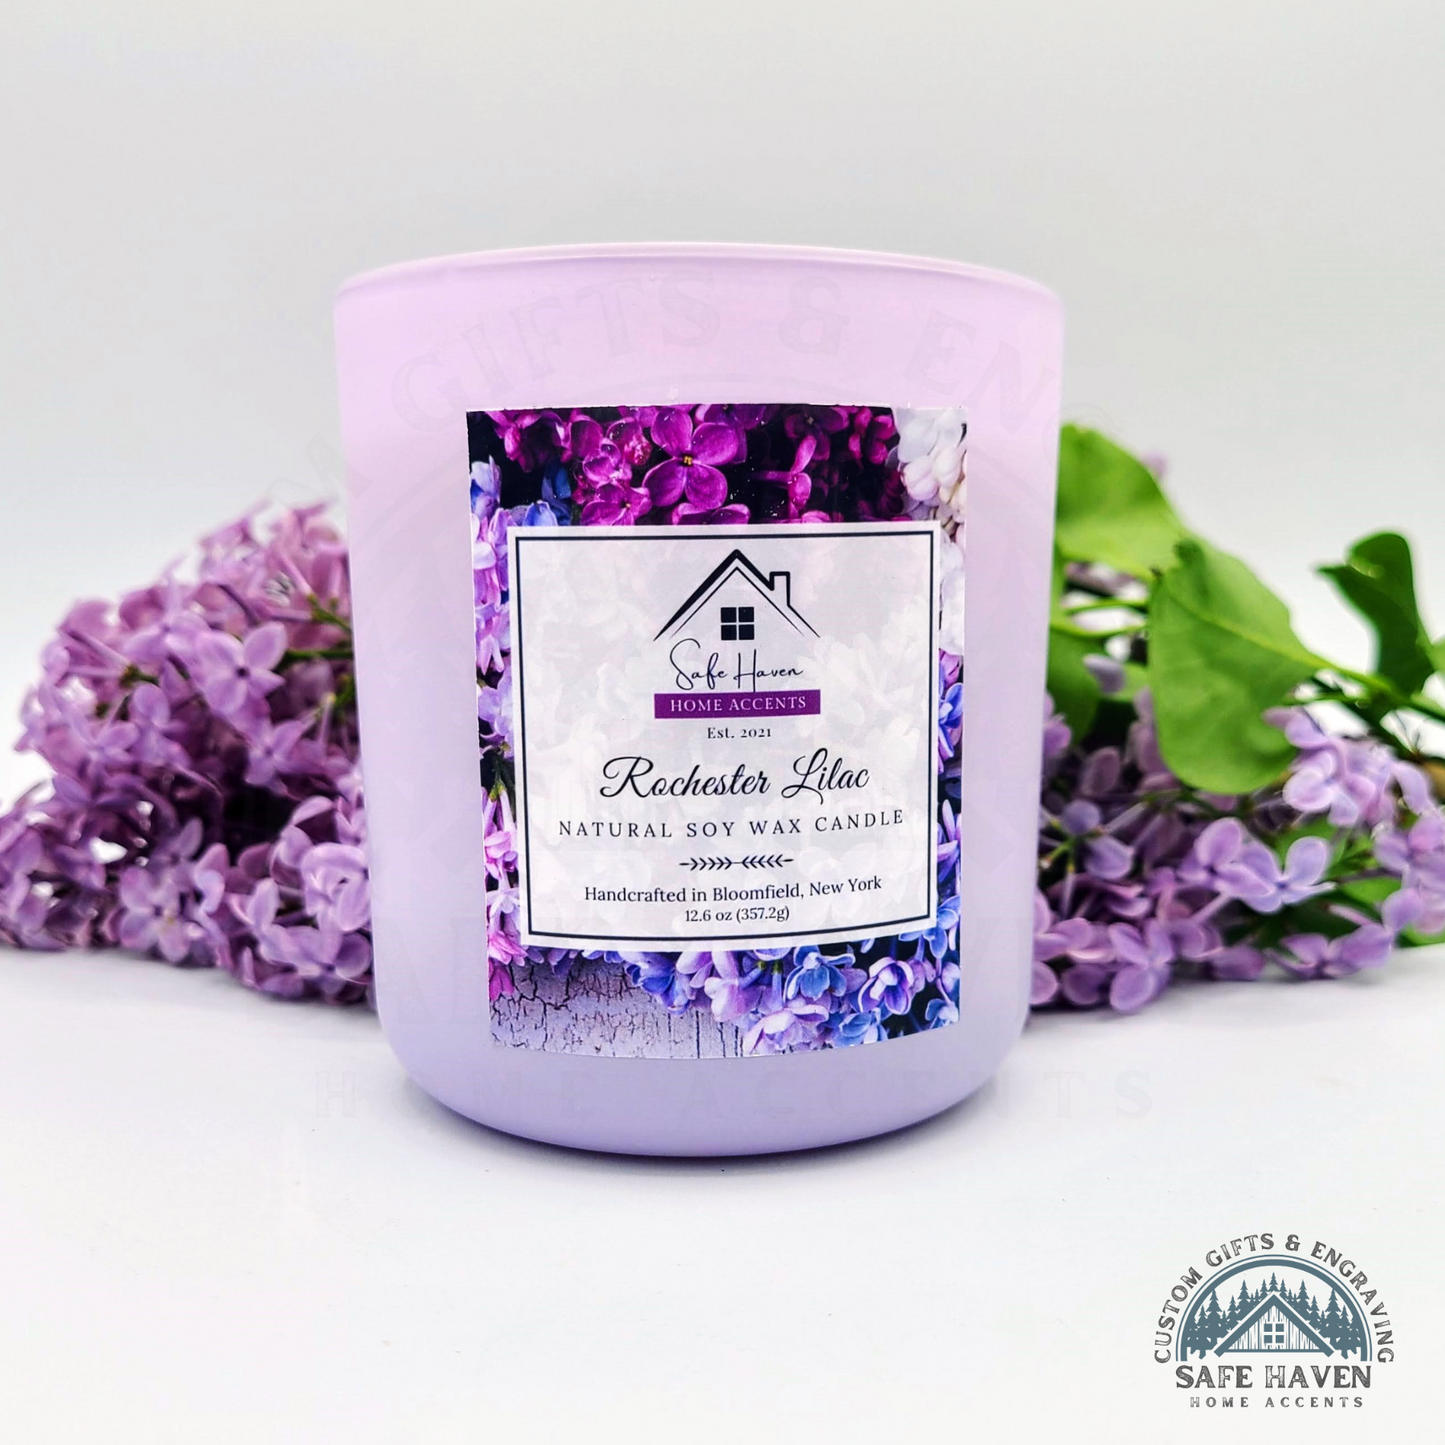 Rochester Lilac Natural Soy Wax Candle